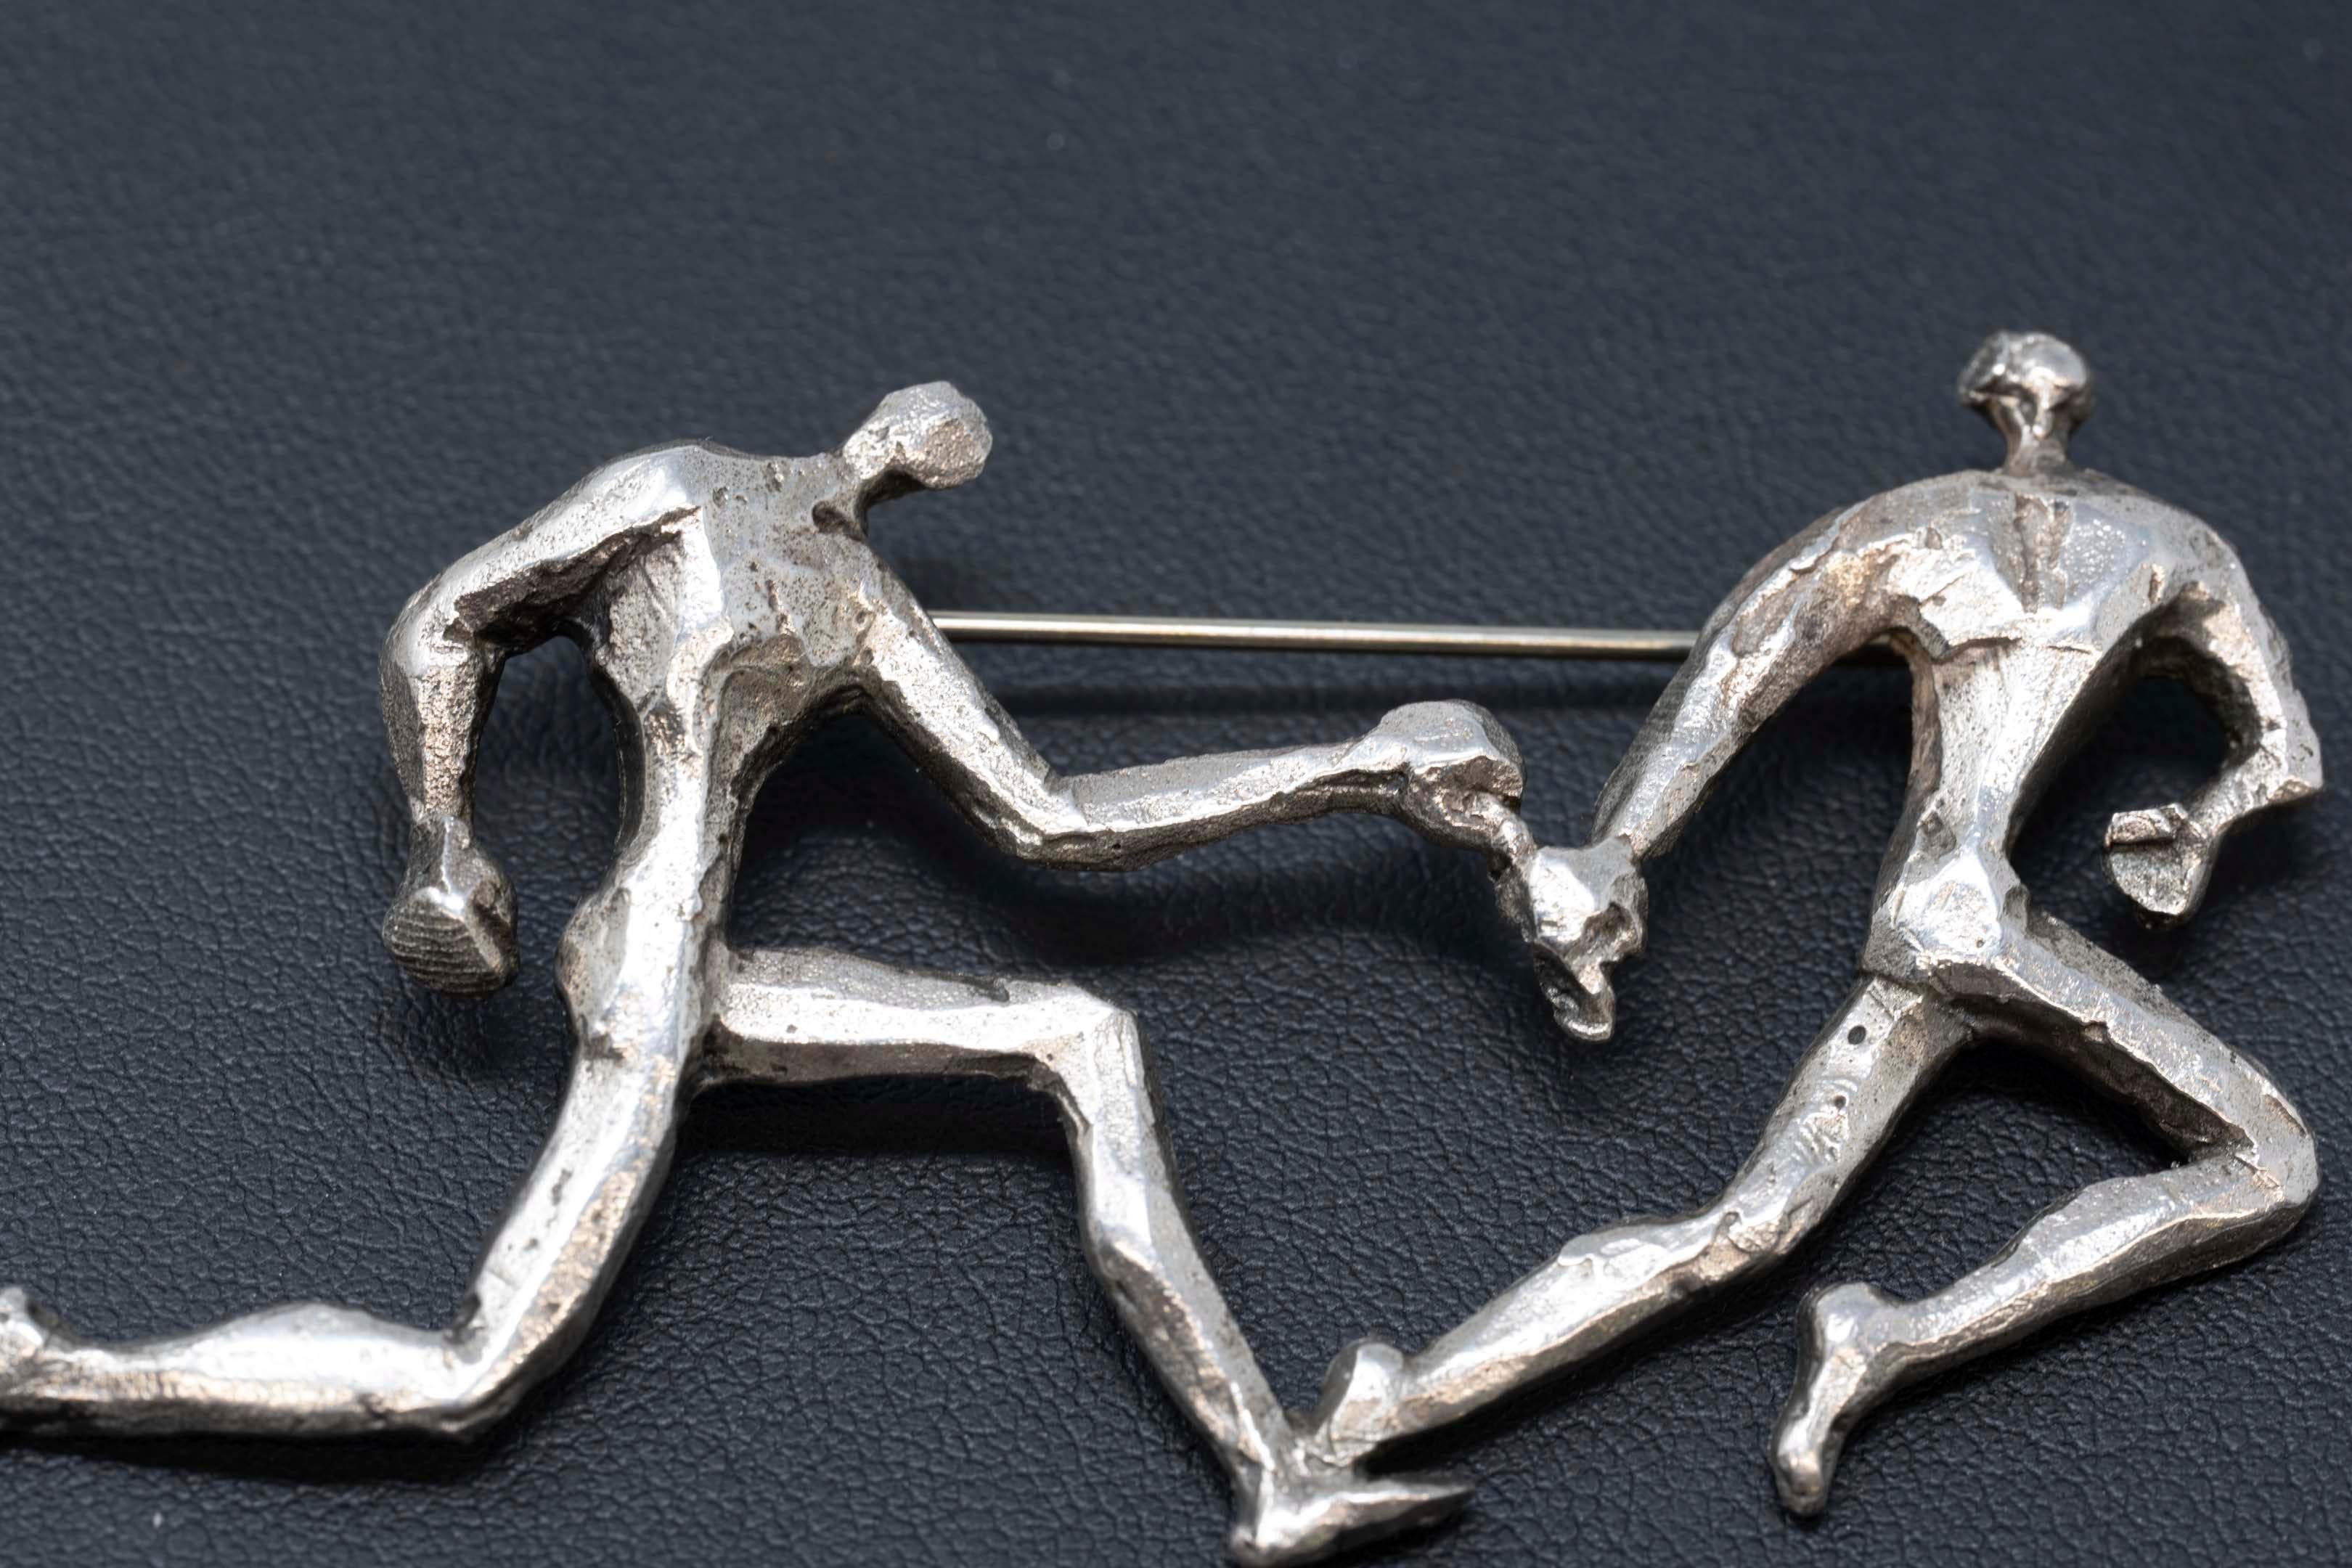 Sterling silver brooch made by Canadian sculptor Esther Wertheimer, born 1926-2016. The brooch is titled 